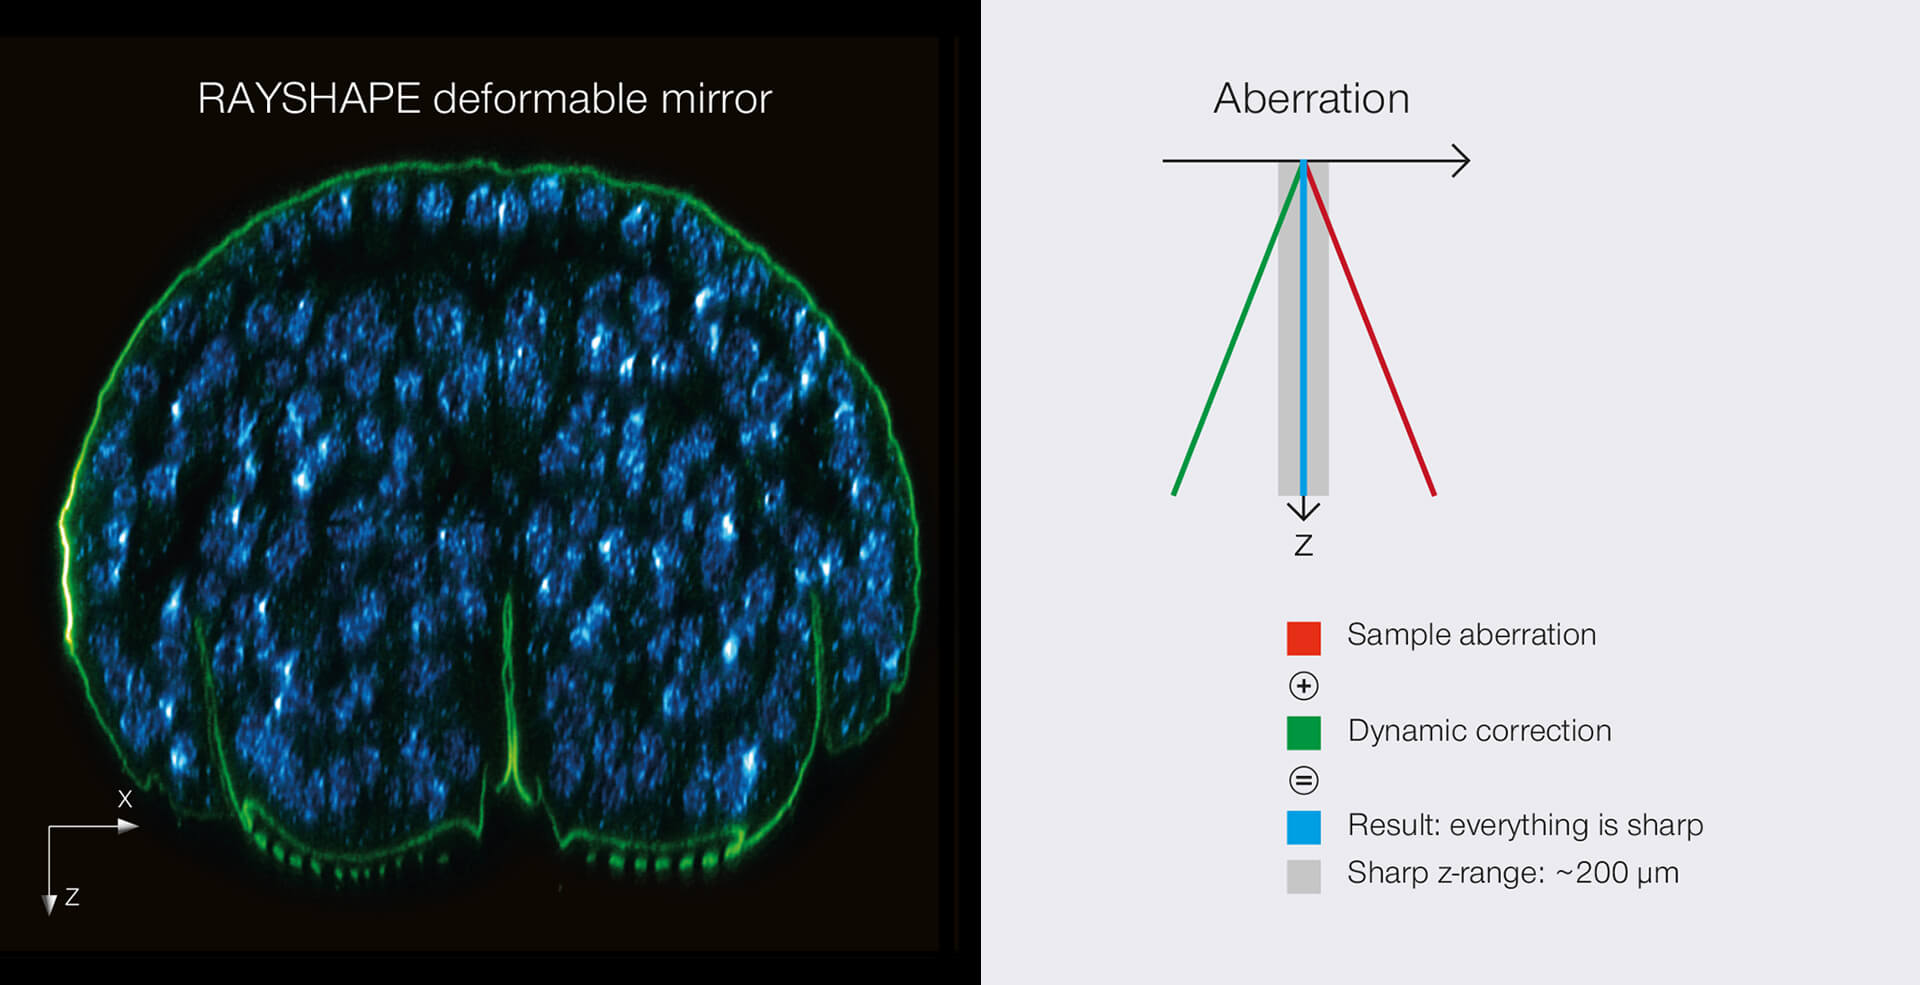 Comparison of RAYSHAPE deformable mirror vs correction collar objective lens. xz section of a stage 17 Drosophila embryo stained for chitin (abberior LIVE 610, green) and DNA (abberior LIVE 550, cyan). Aberration-free from the cover slip overt the whole depth of about 200 µm.